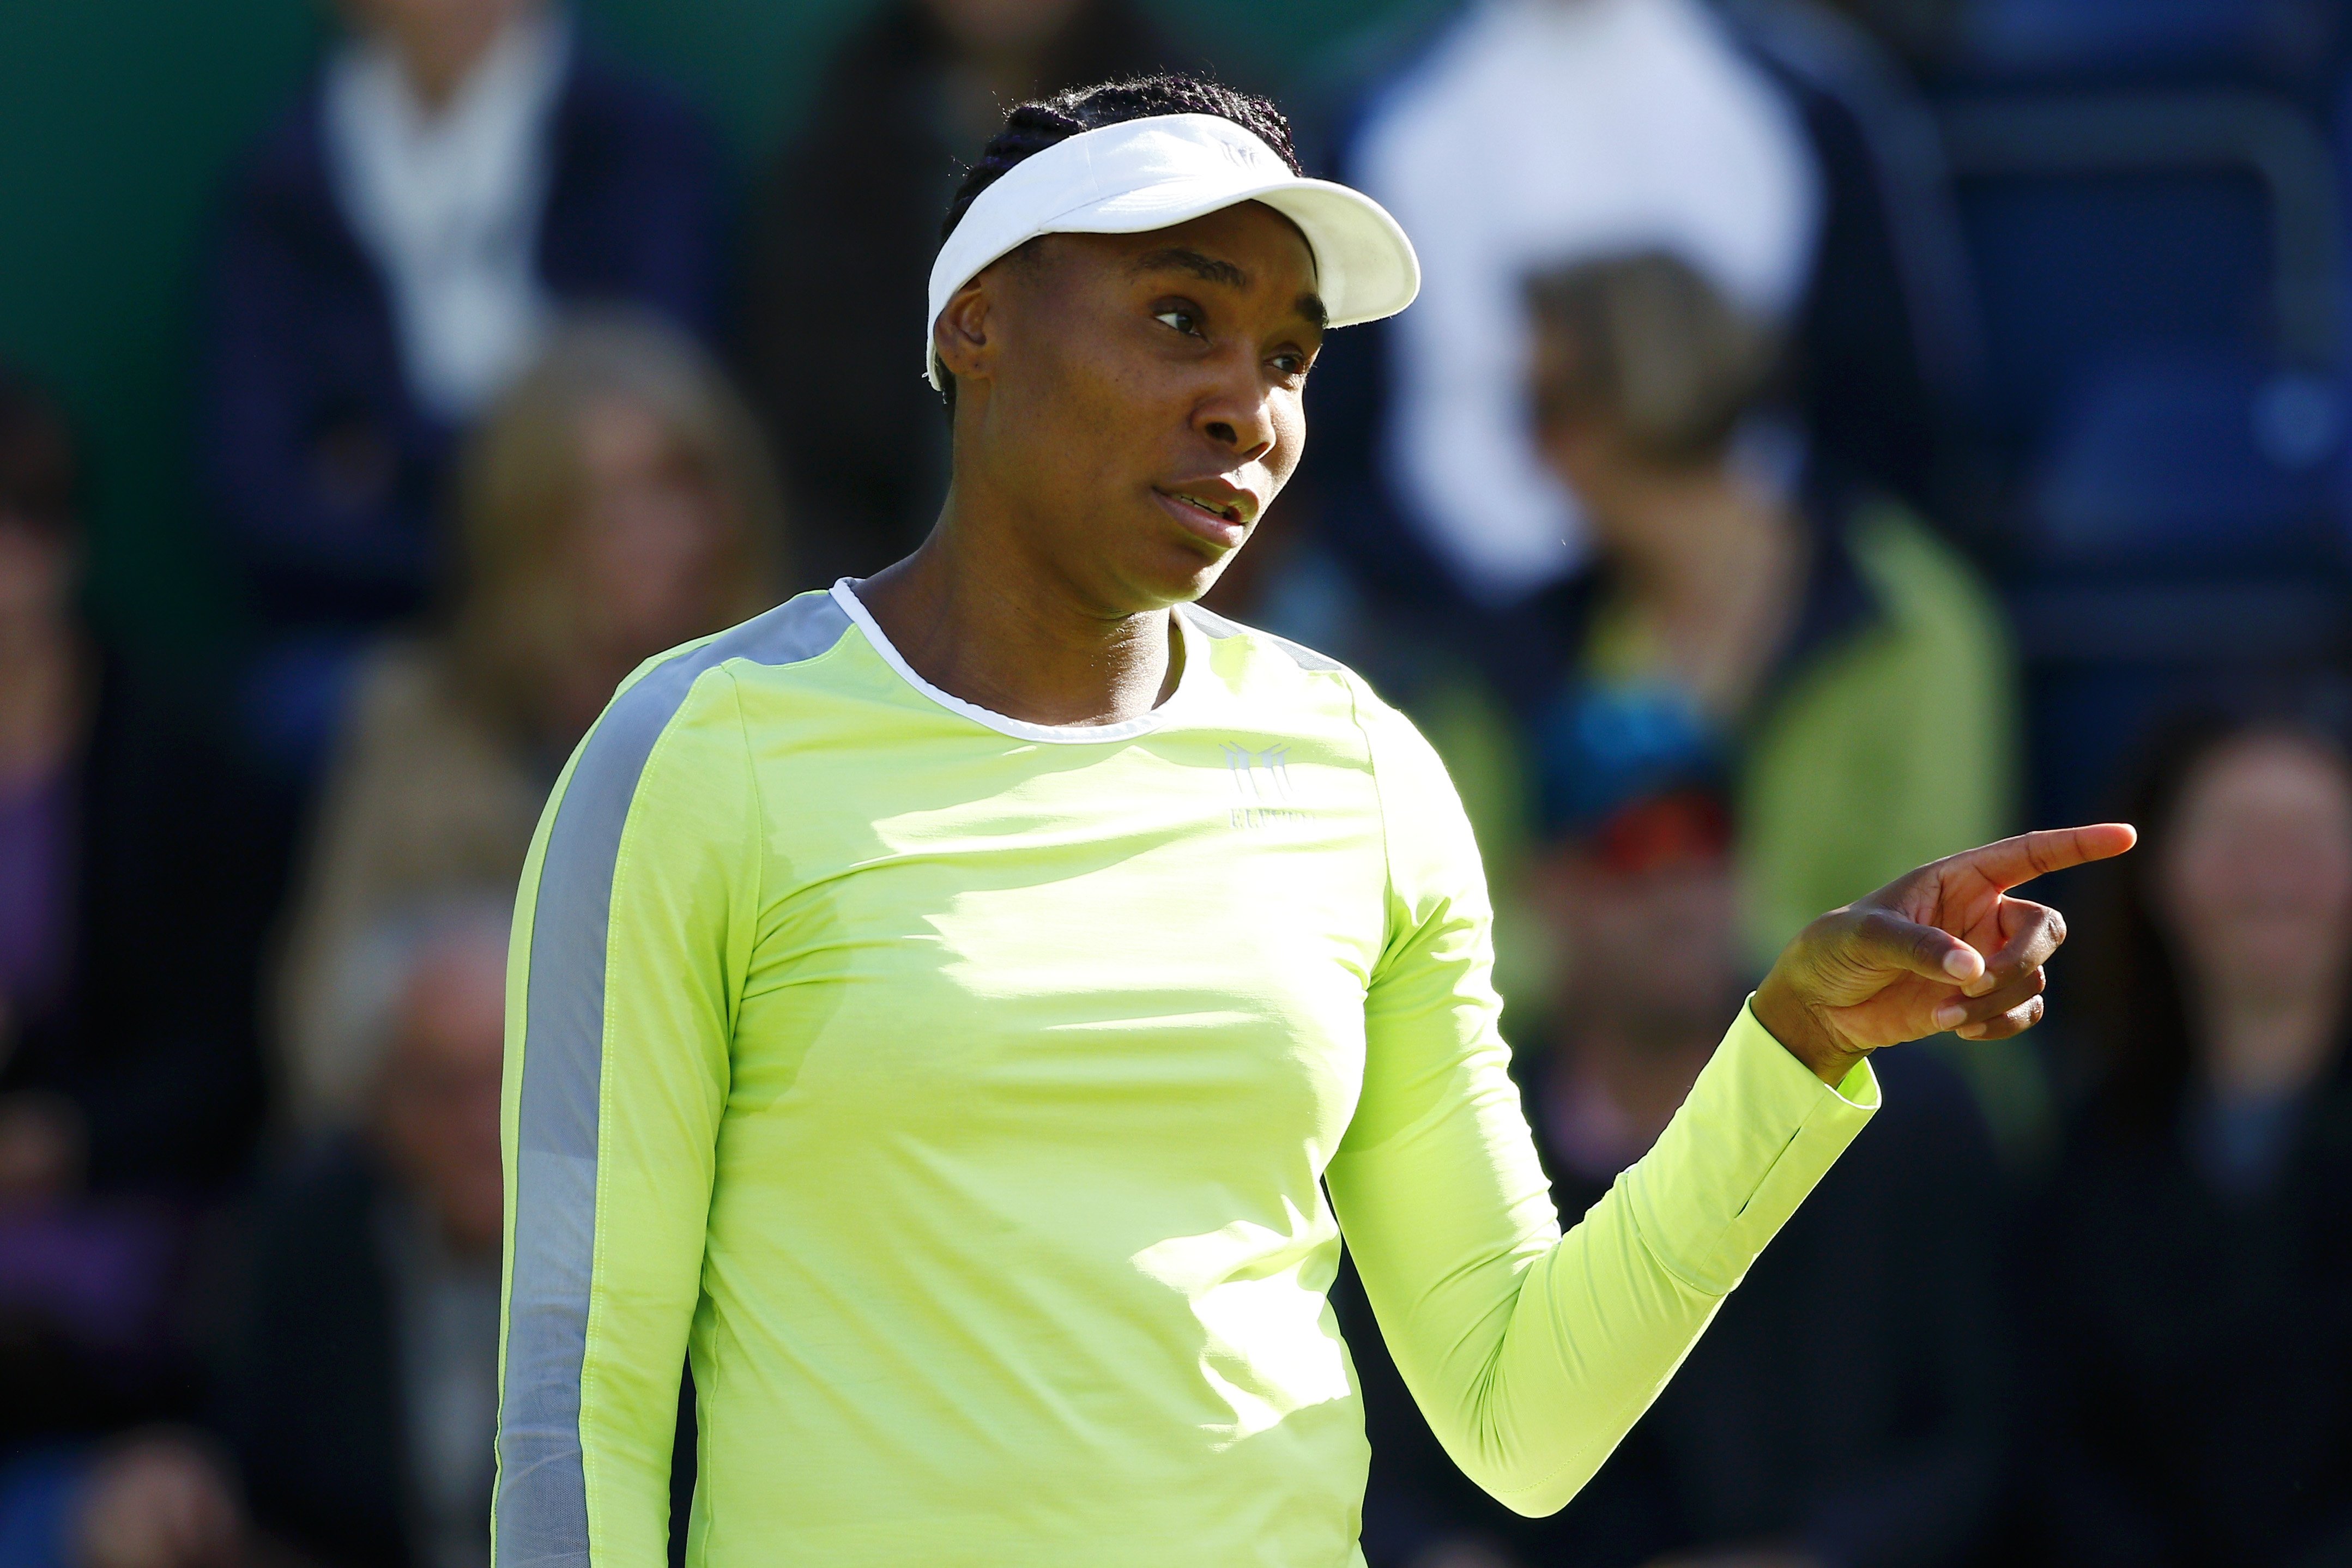 Venus Williams at the Nature Valley Classic at Edgbaston Priory Club on June 20, 2019 in Birmingham, United Kingdom  | Photo: Getty Images